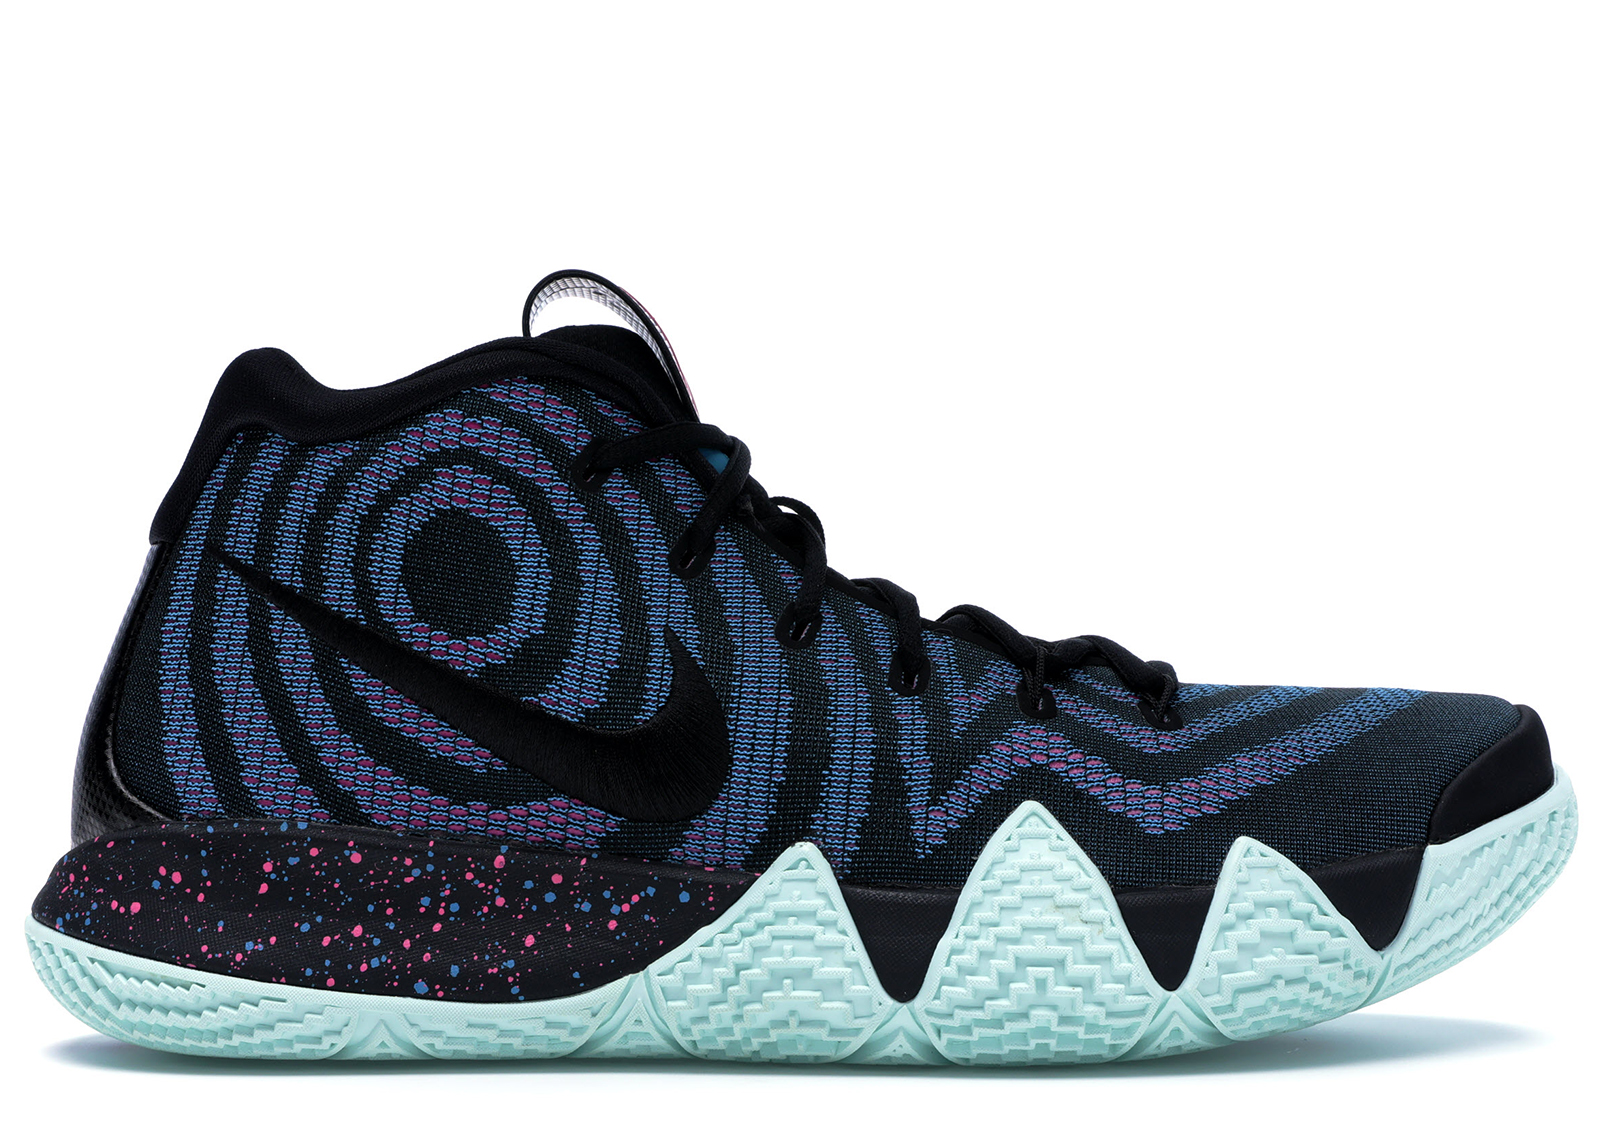 kyrie 4s shoes